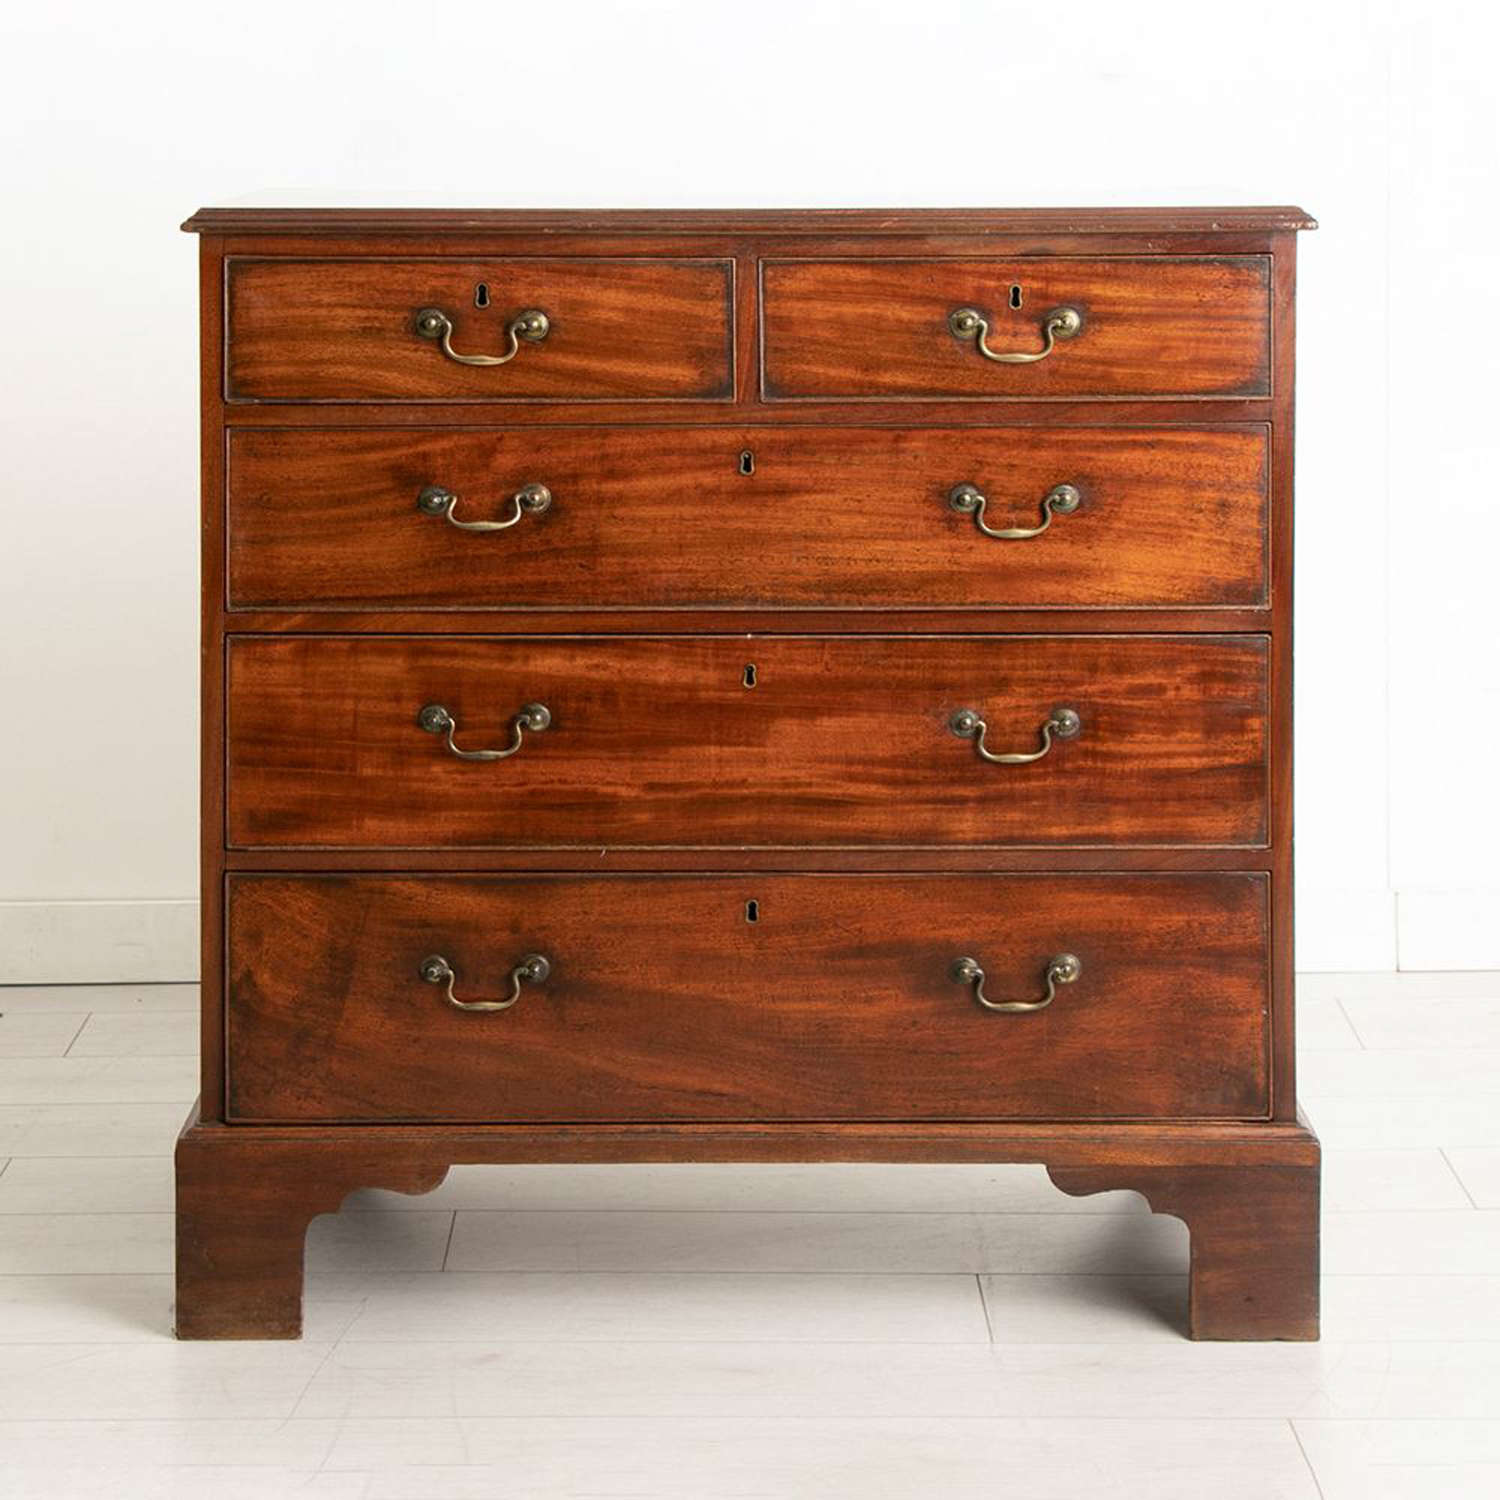 Antique Georgian Mahogany Bachelor's Chest of Drawers c.1800